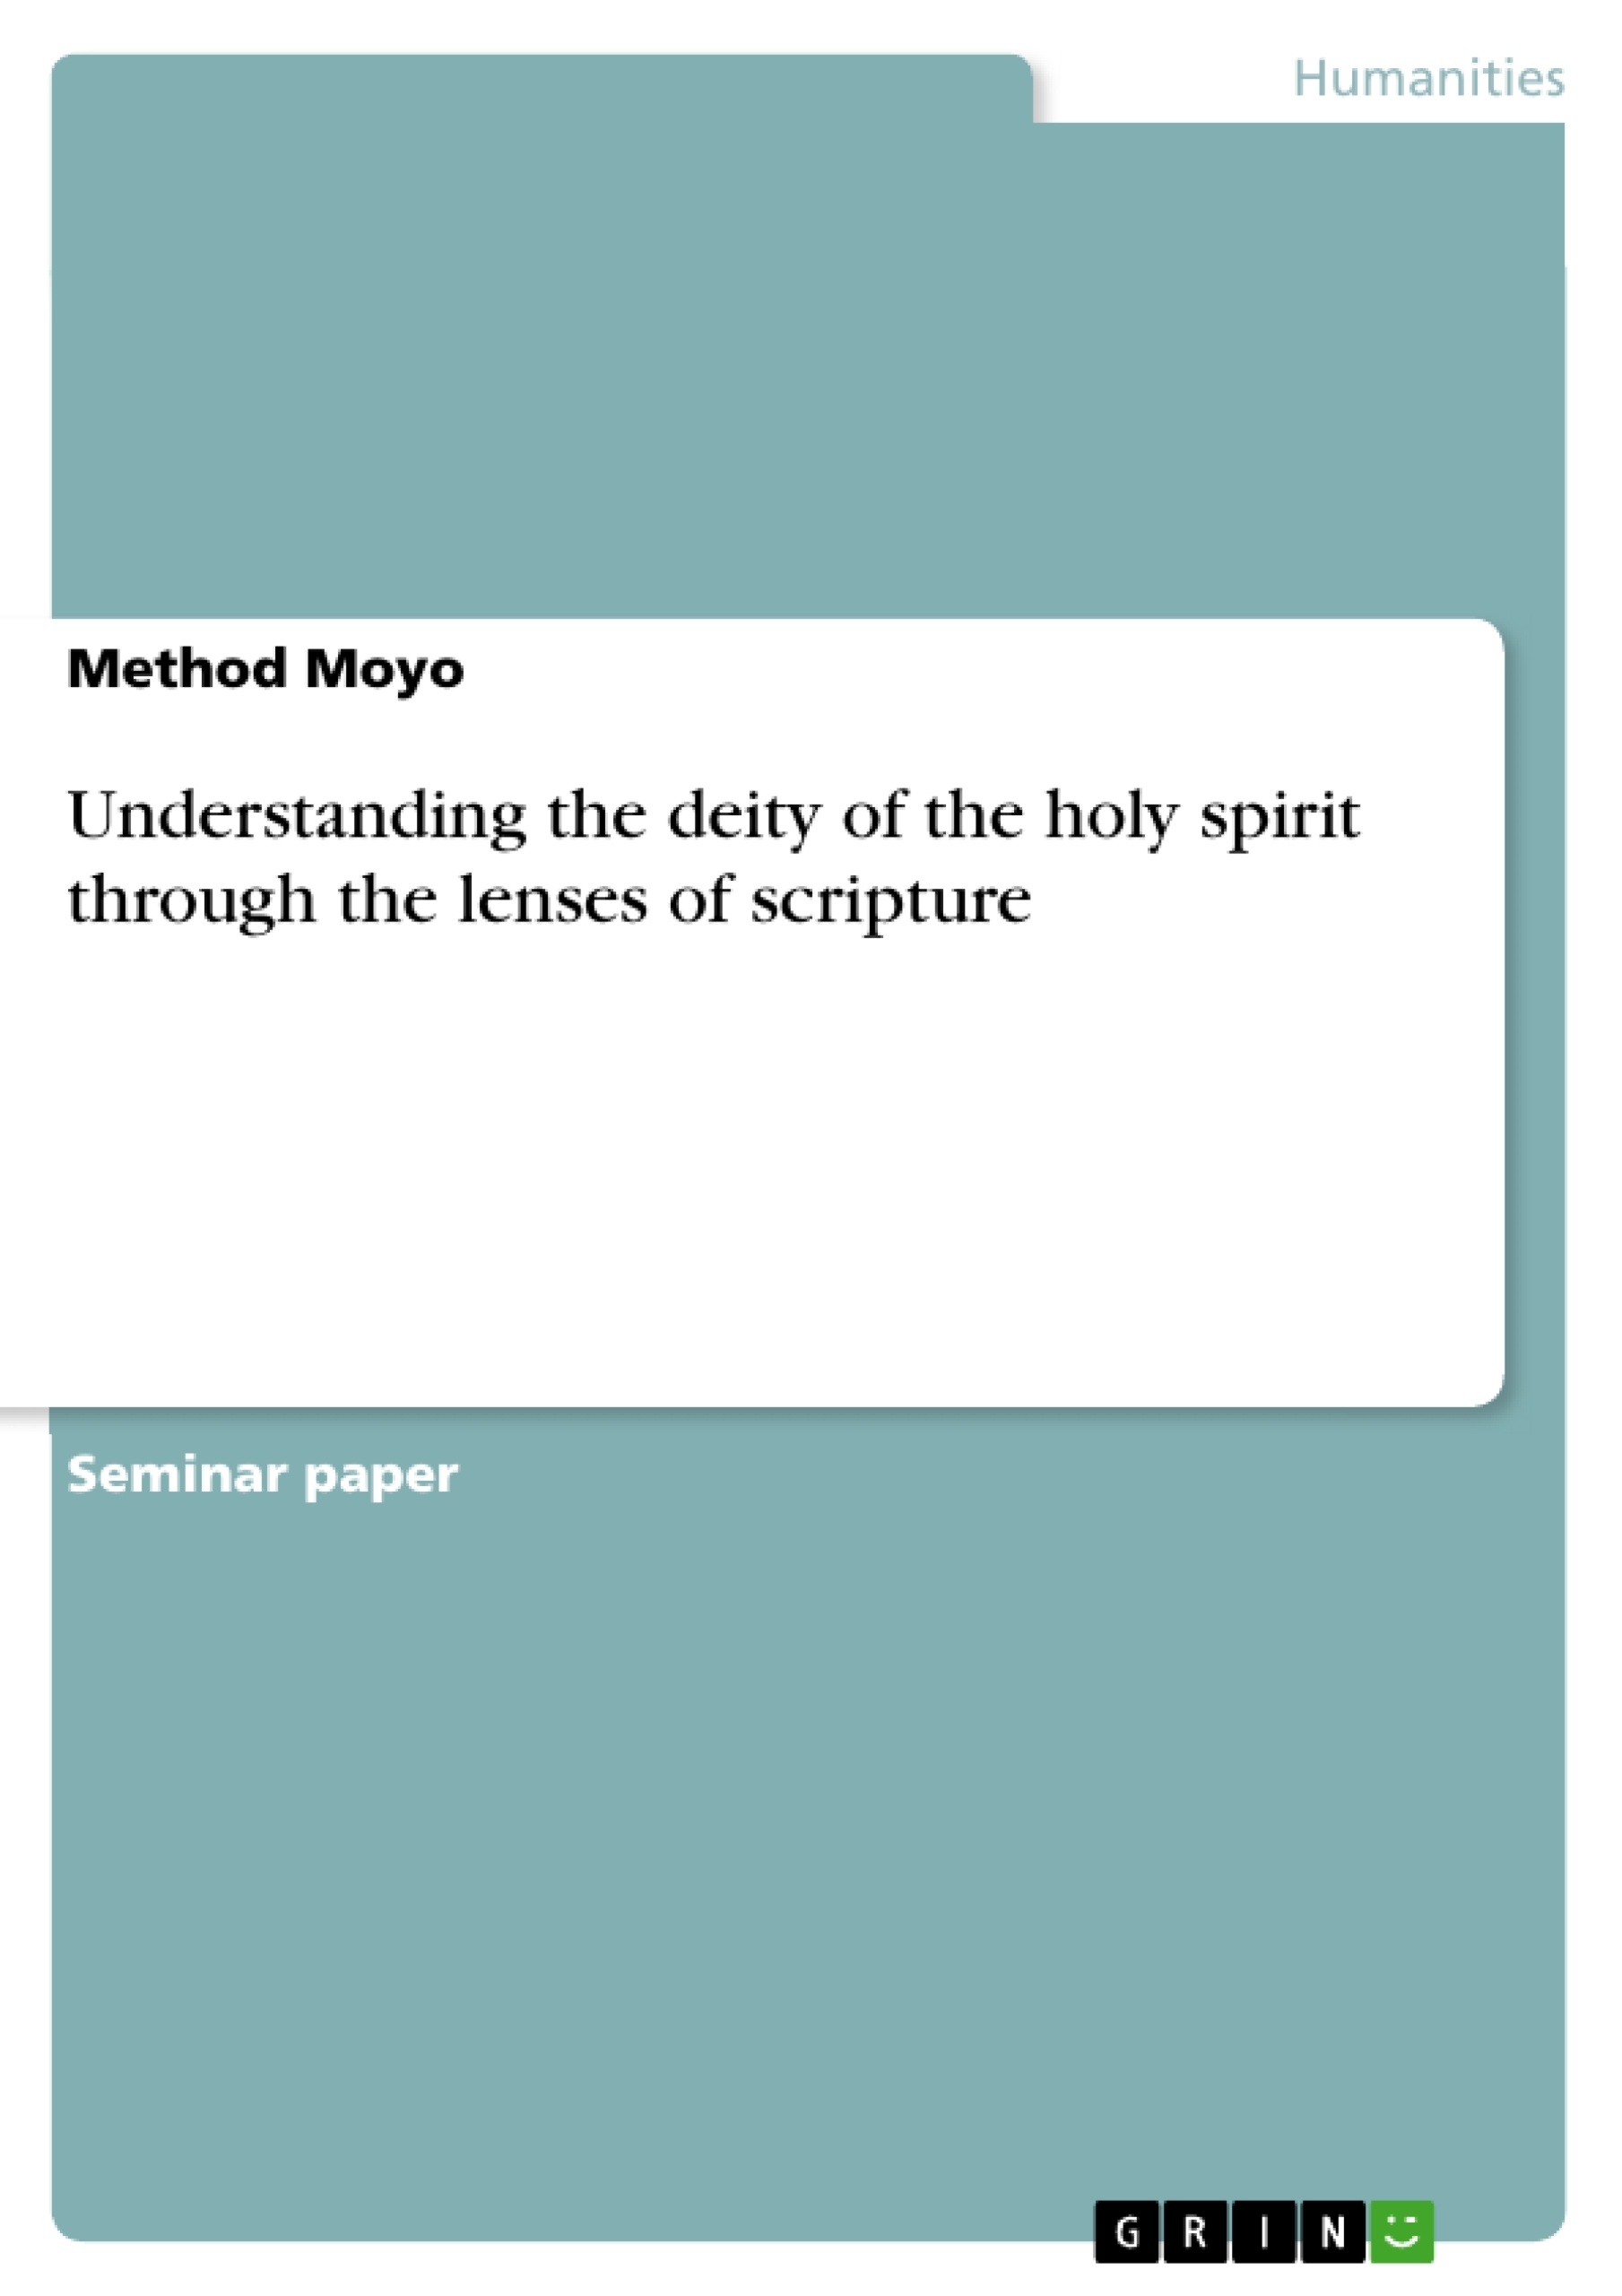 Title: Understanding the deity of the holy spirit through the lenses of scripture